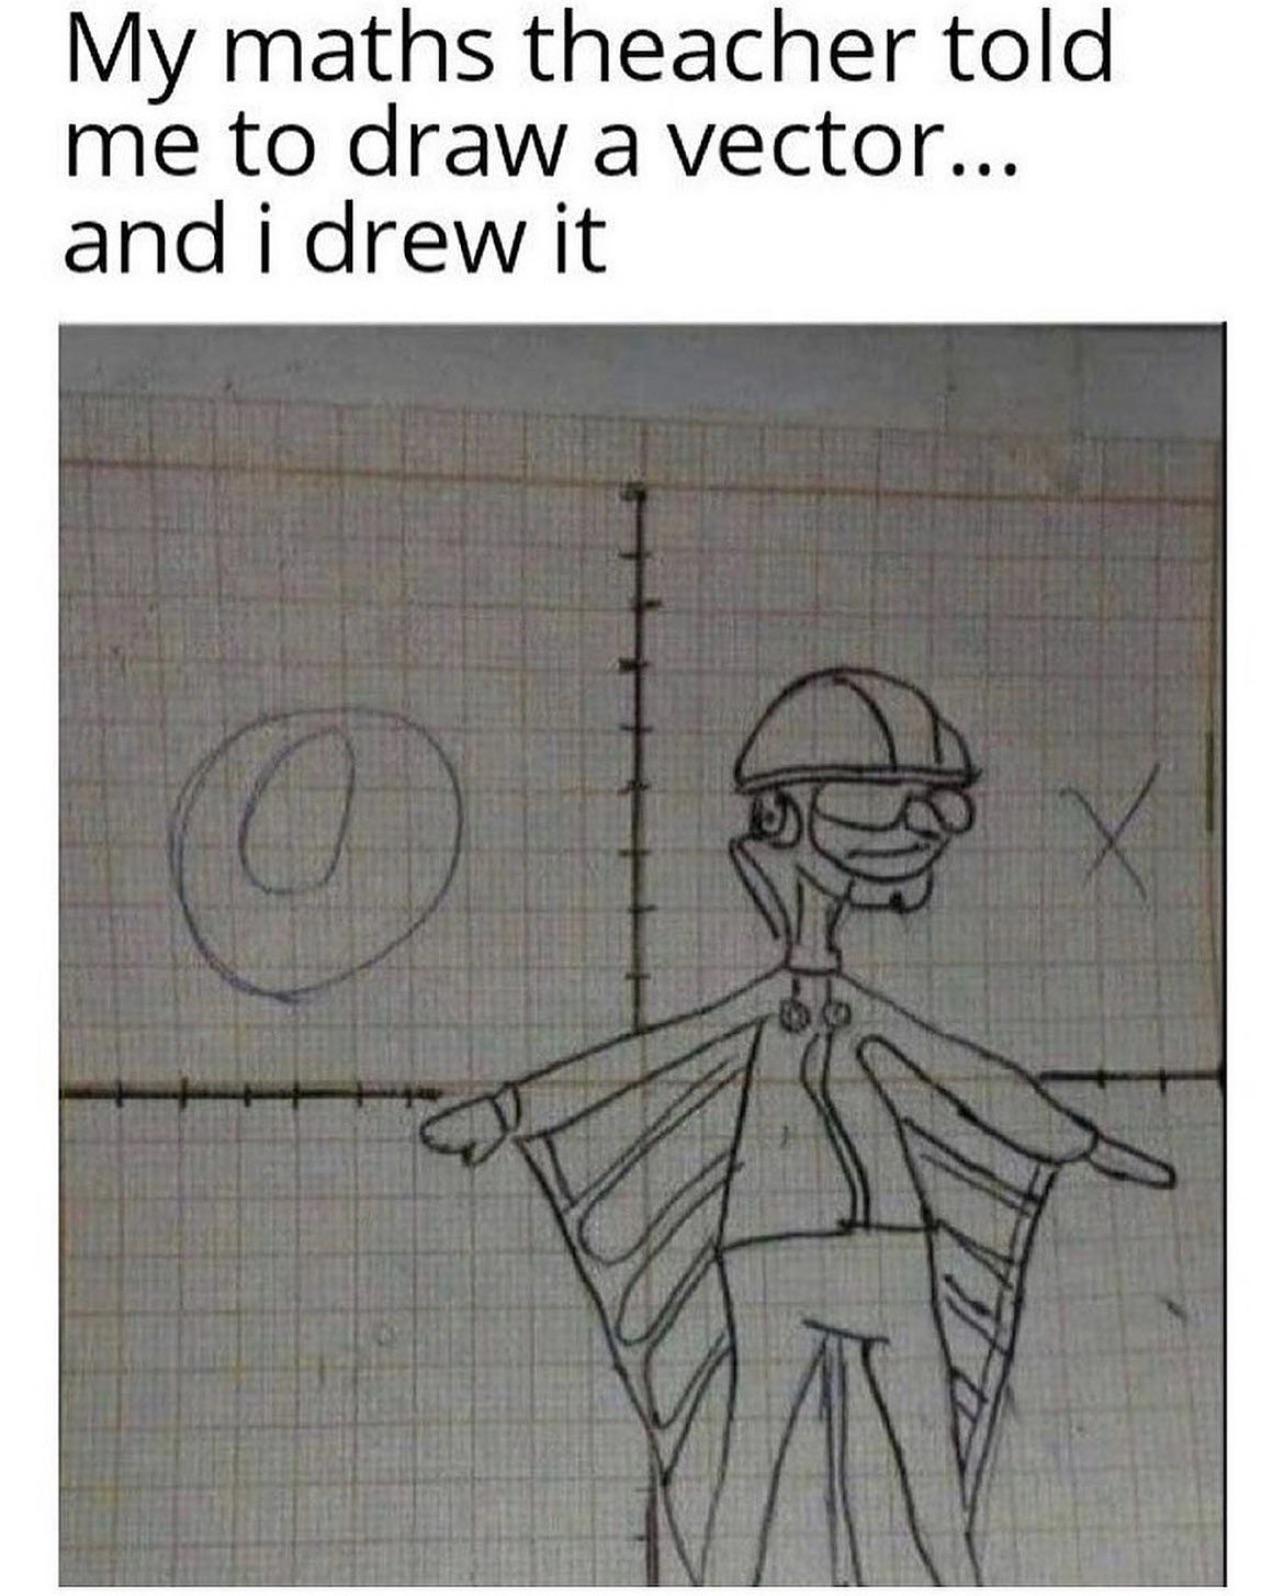 hilarious memes - memes 2021 maths - My maths theacher told me to draw a vector... and i drew it so